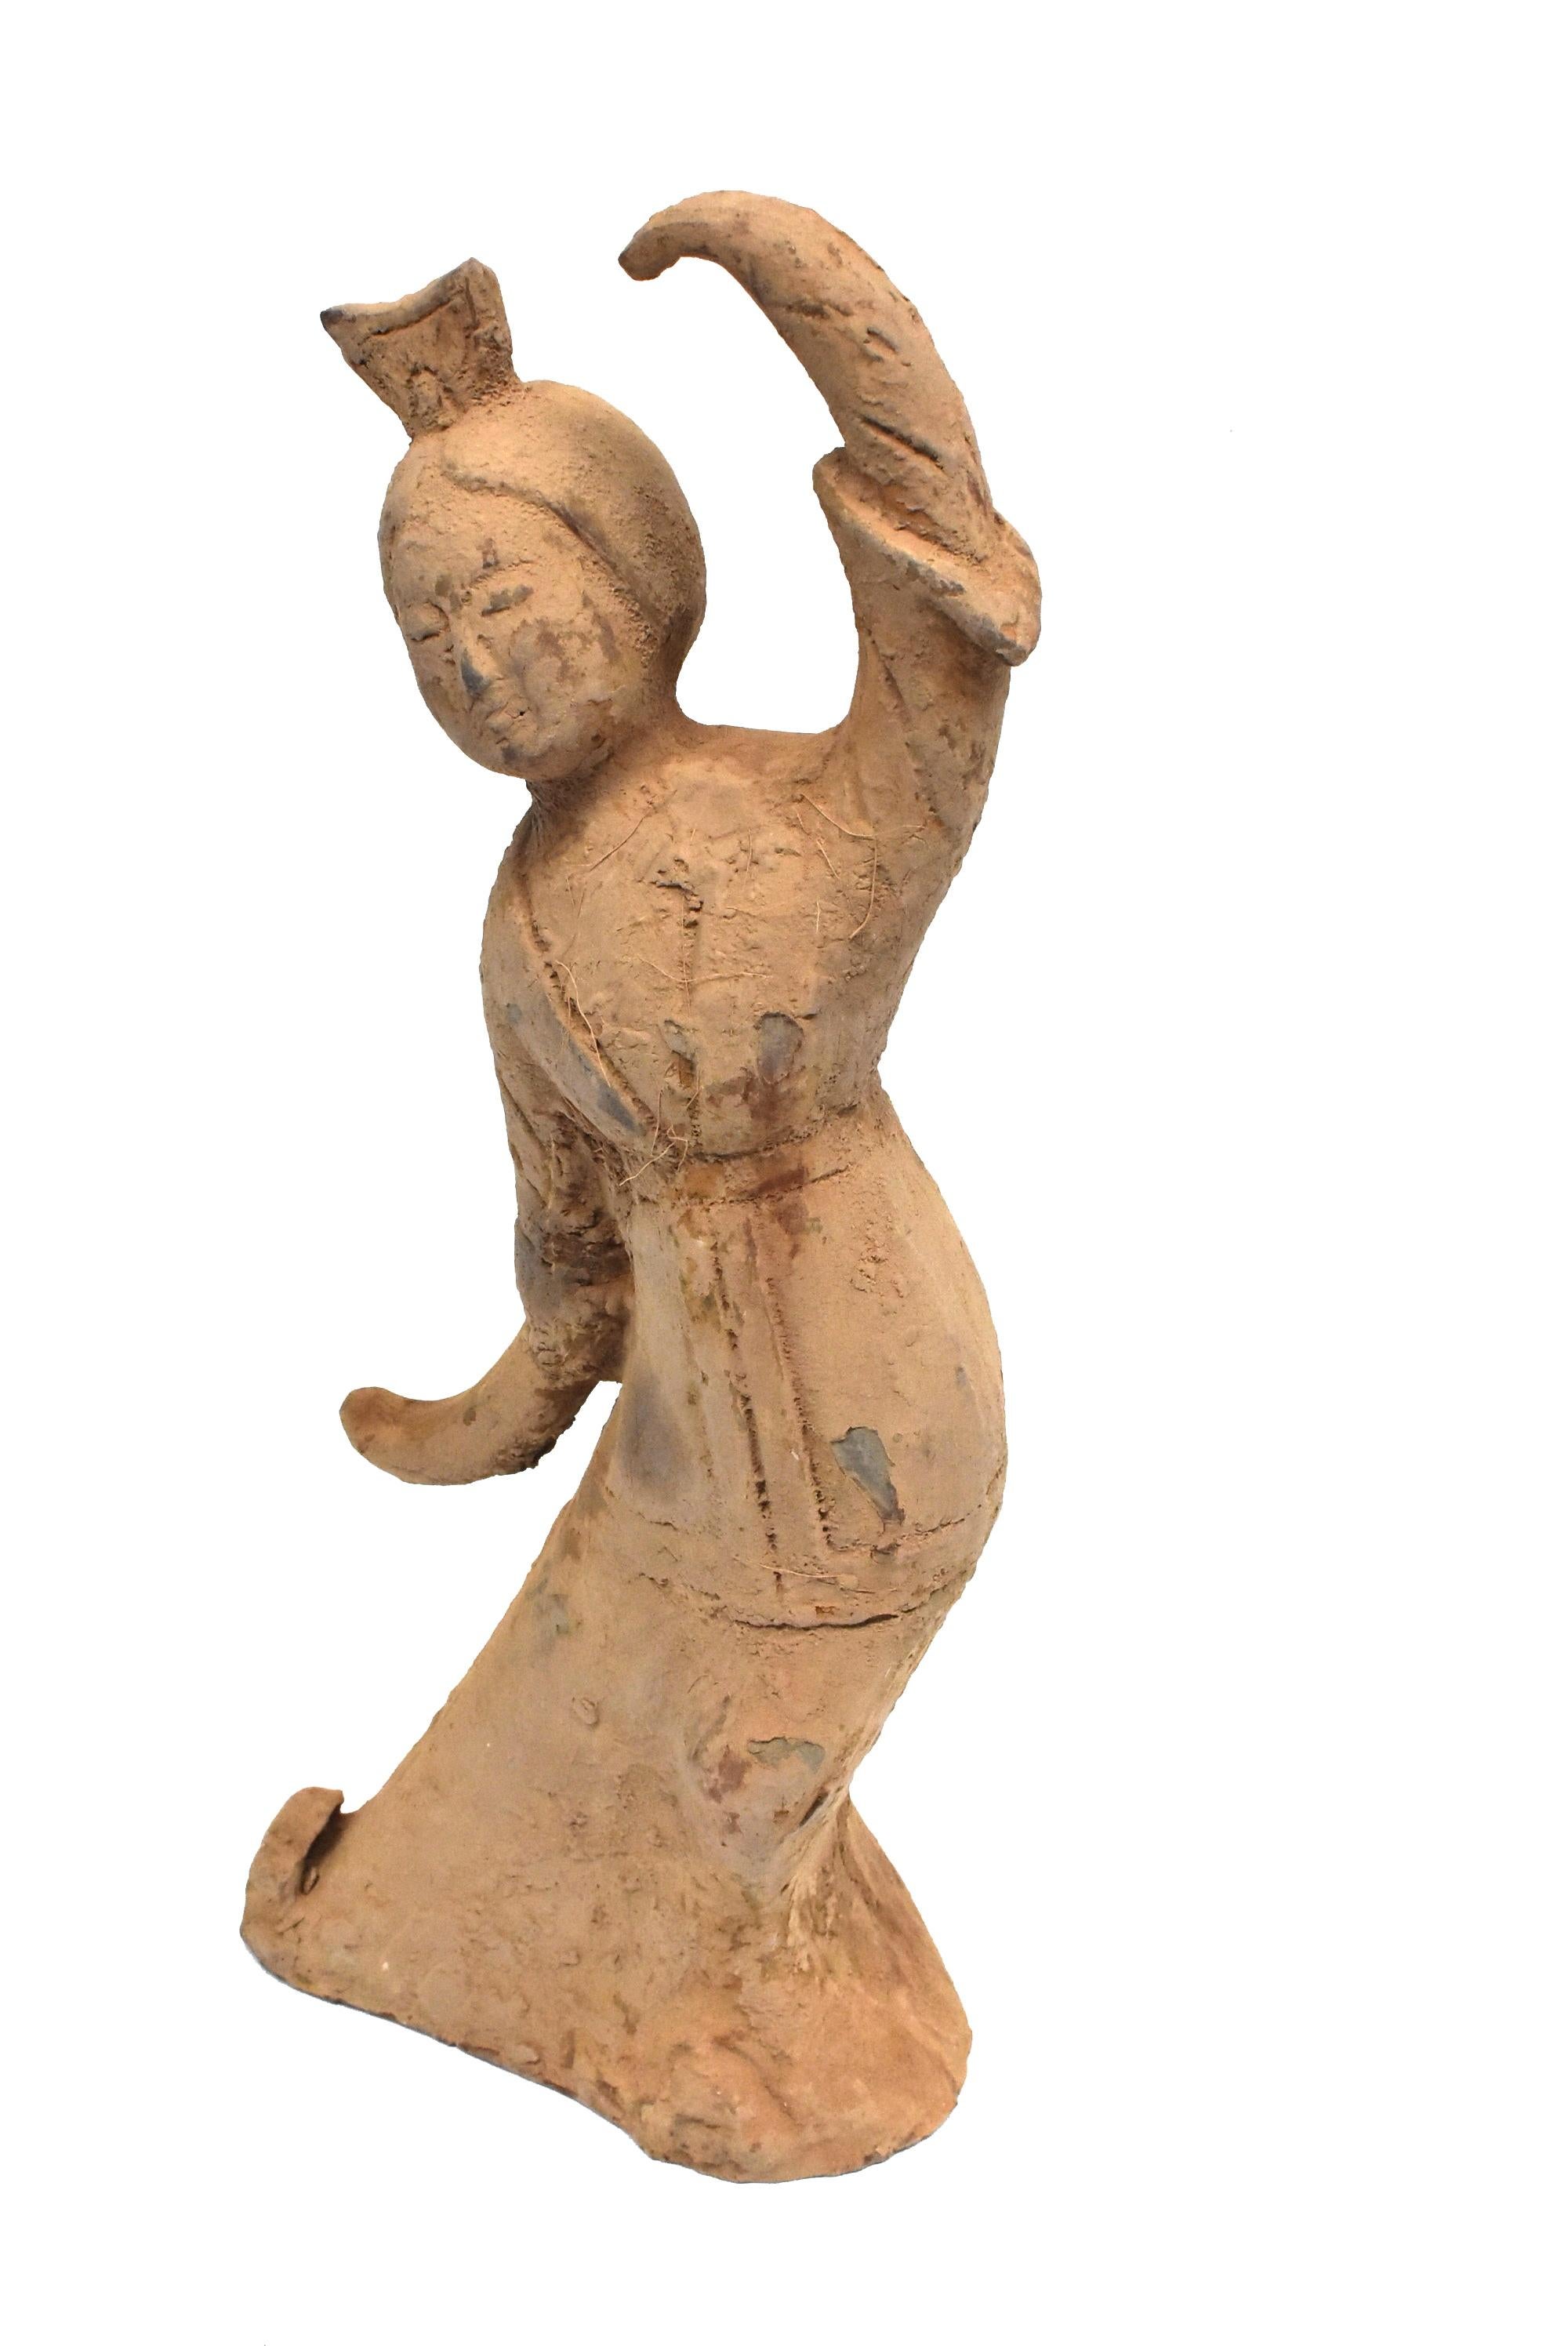 A beautiful large pottery figure, Han style. The figure appears to be dancing. She wears a robe with cinched waist and wide sleeves. A high crown tops her gathered hair. Her facial features are delicate and youthful. 